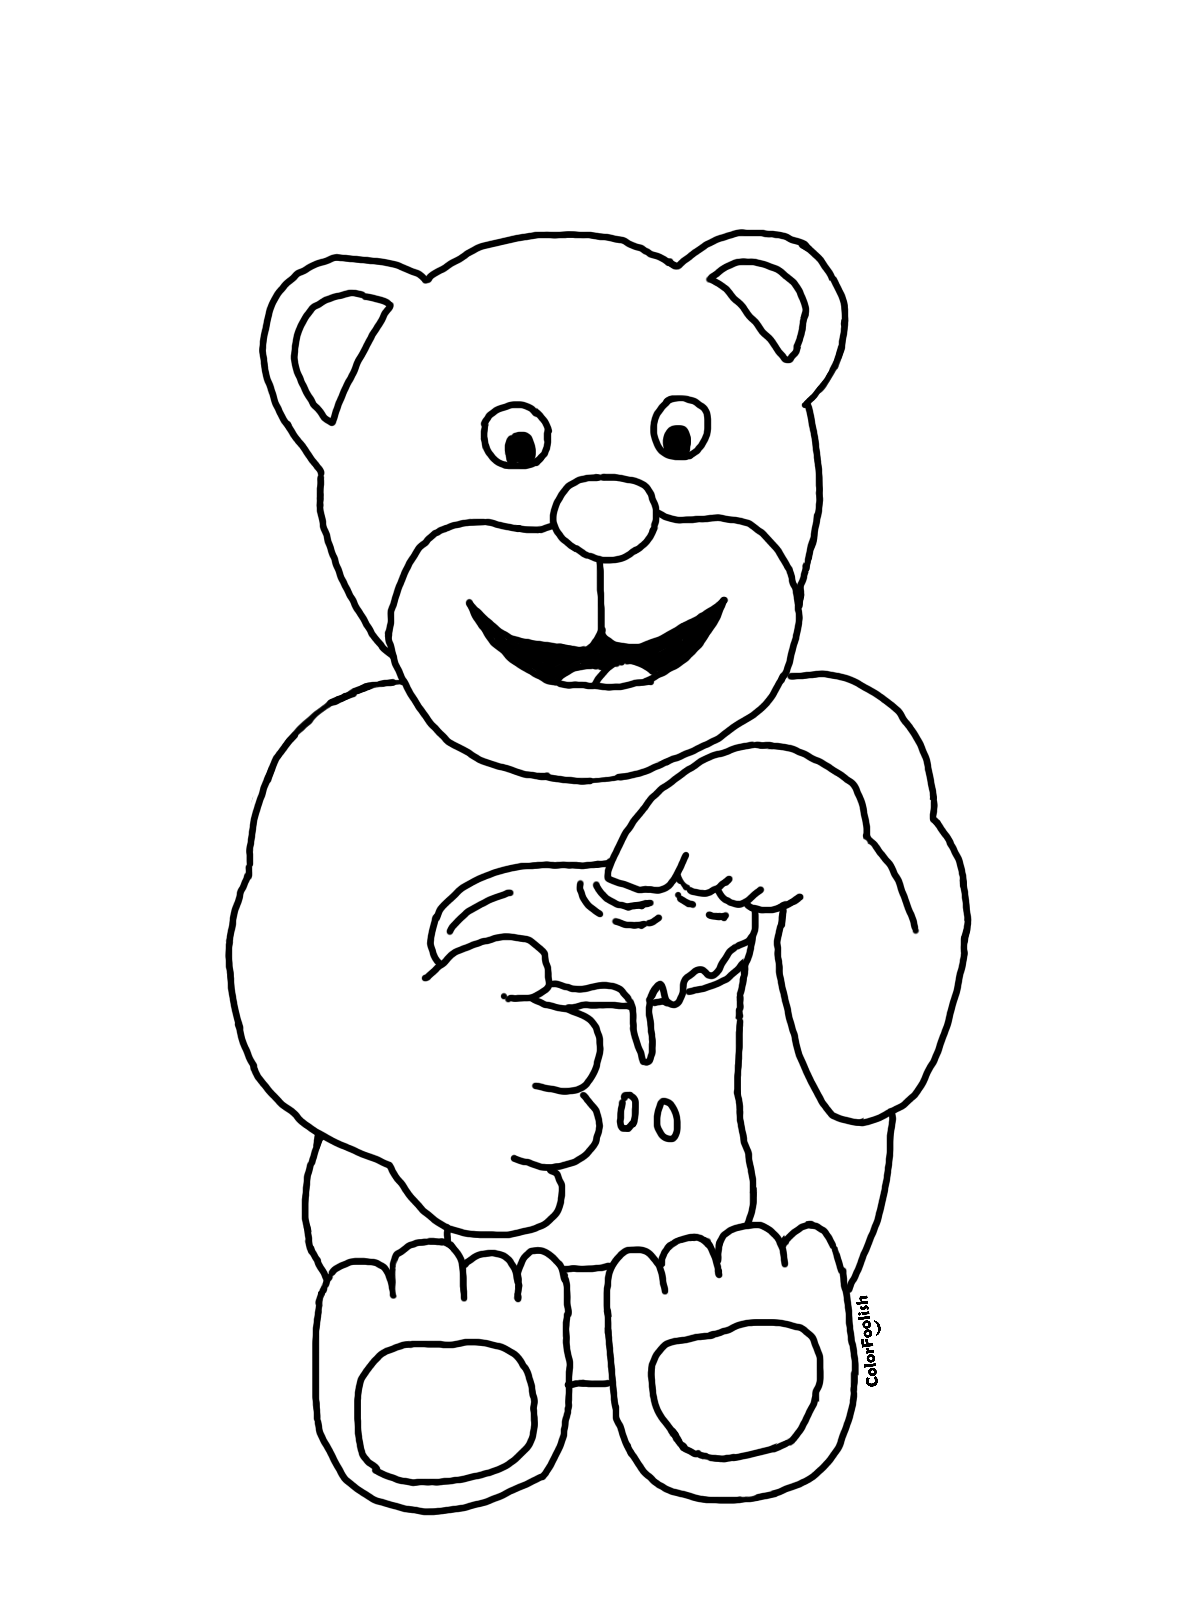 Coloring page of a bear eating honey